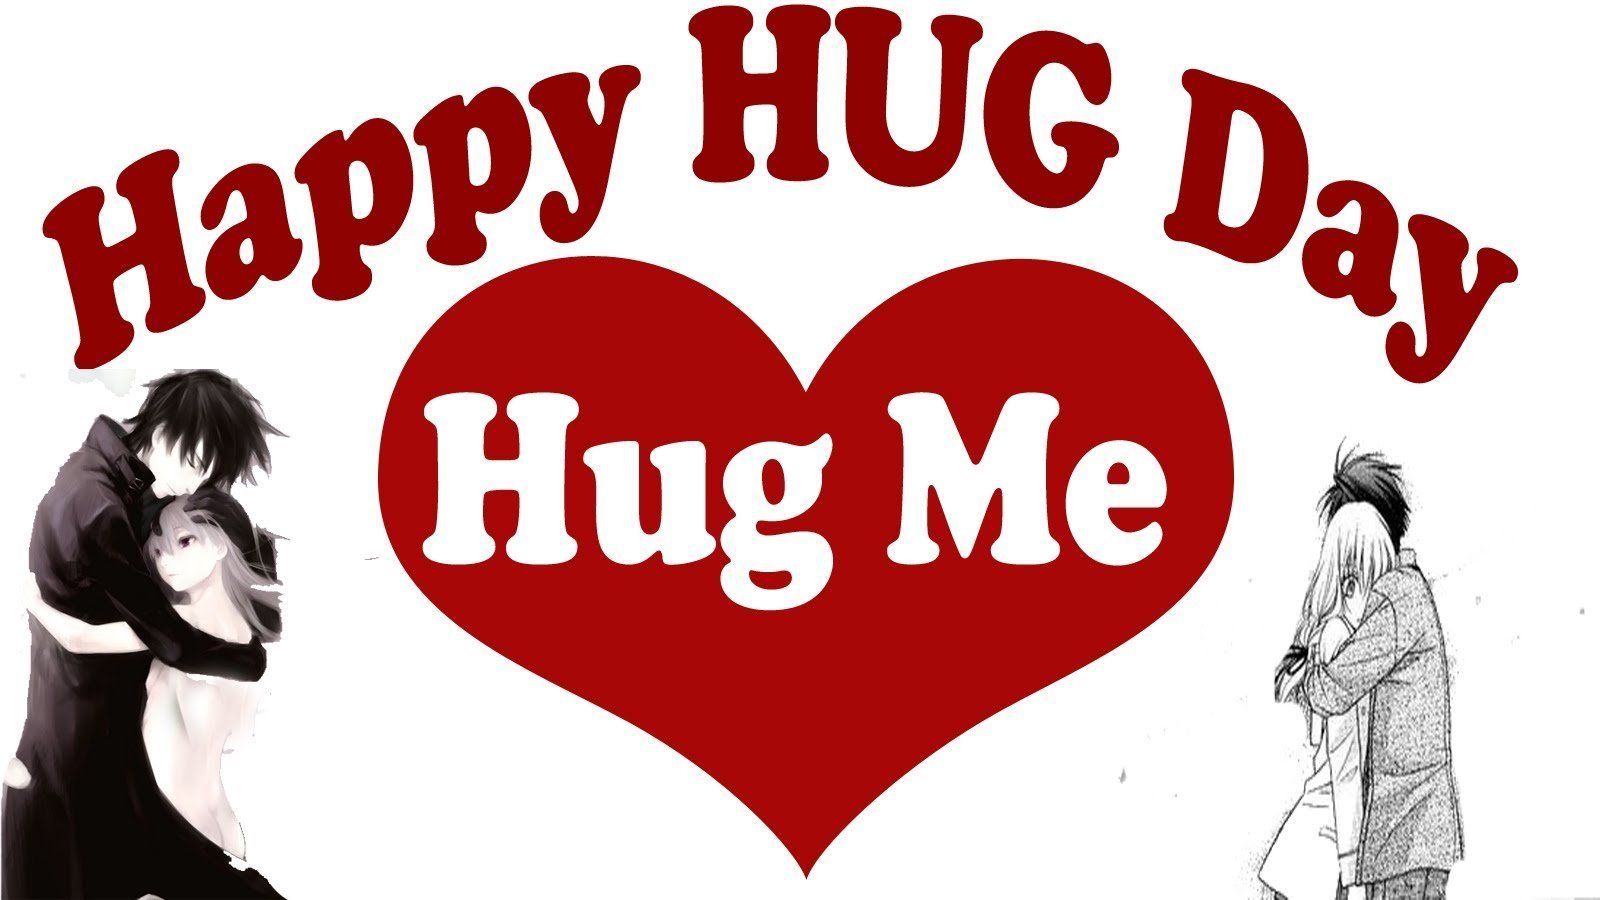 Hug Day Quotes